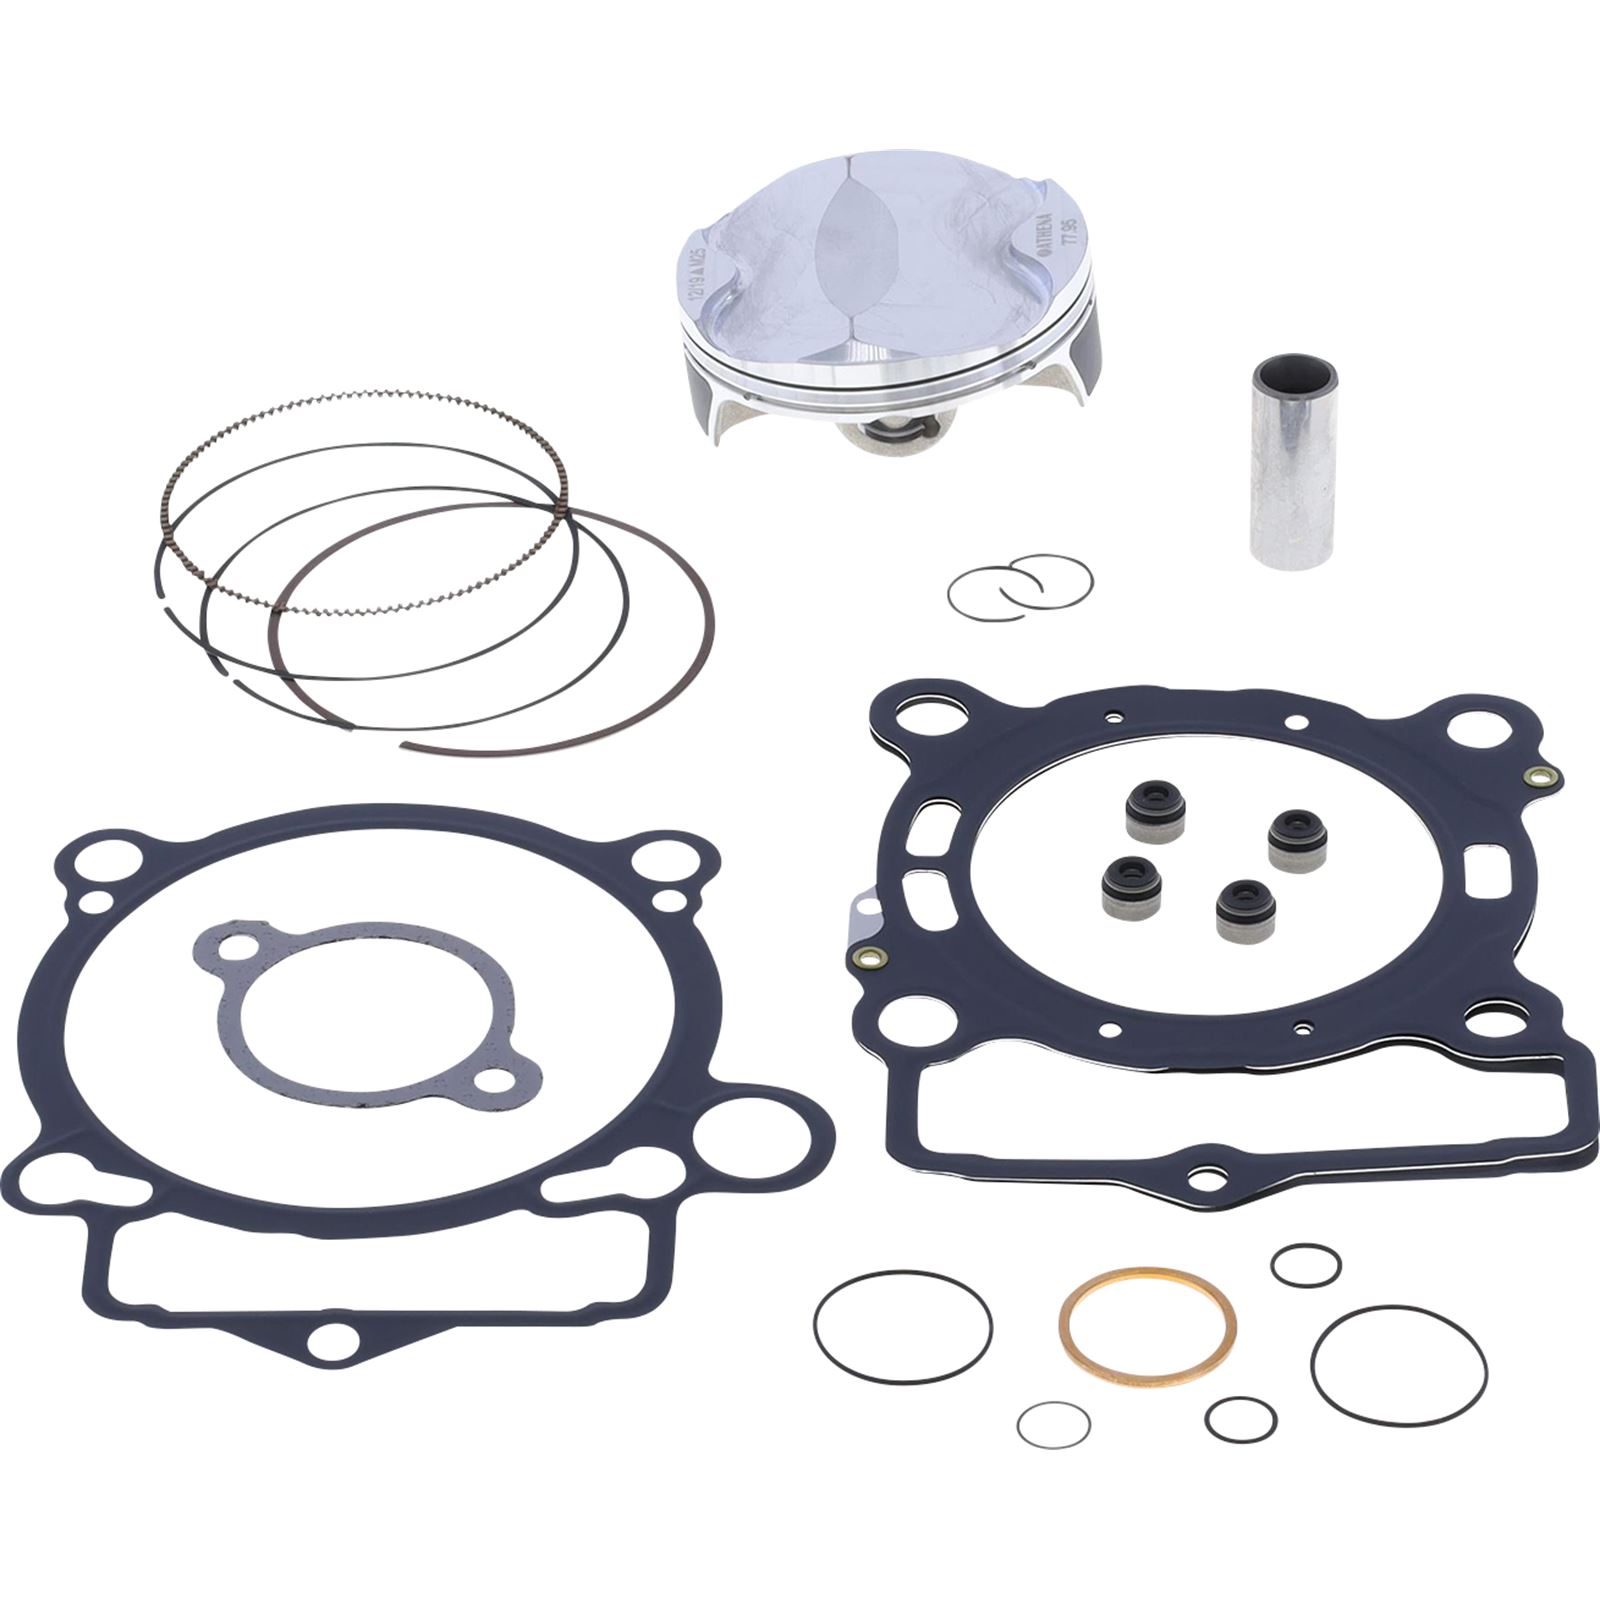 Athena Piston Kit with Gaskets for KTM 250 EXC-F 2014-2016